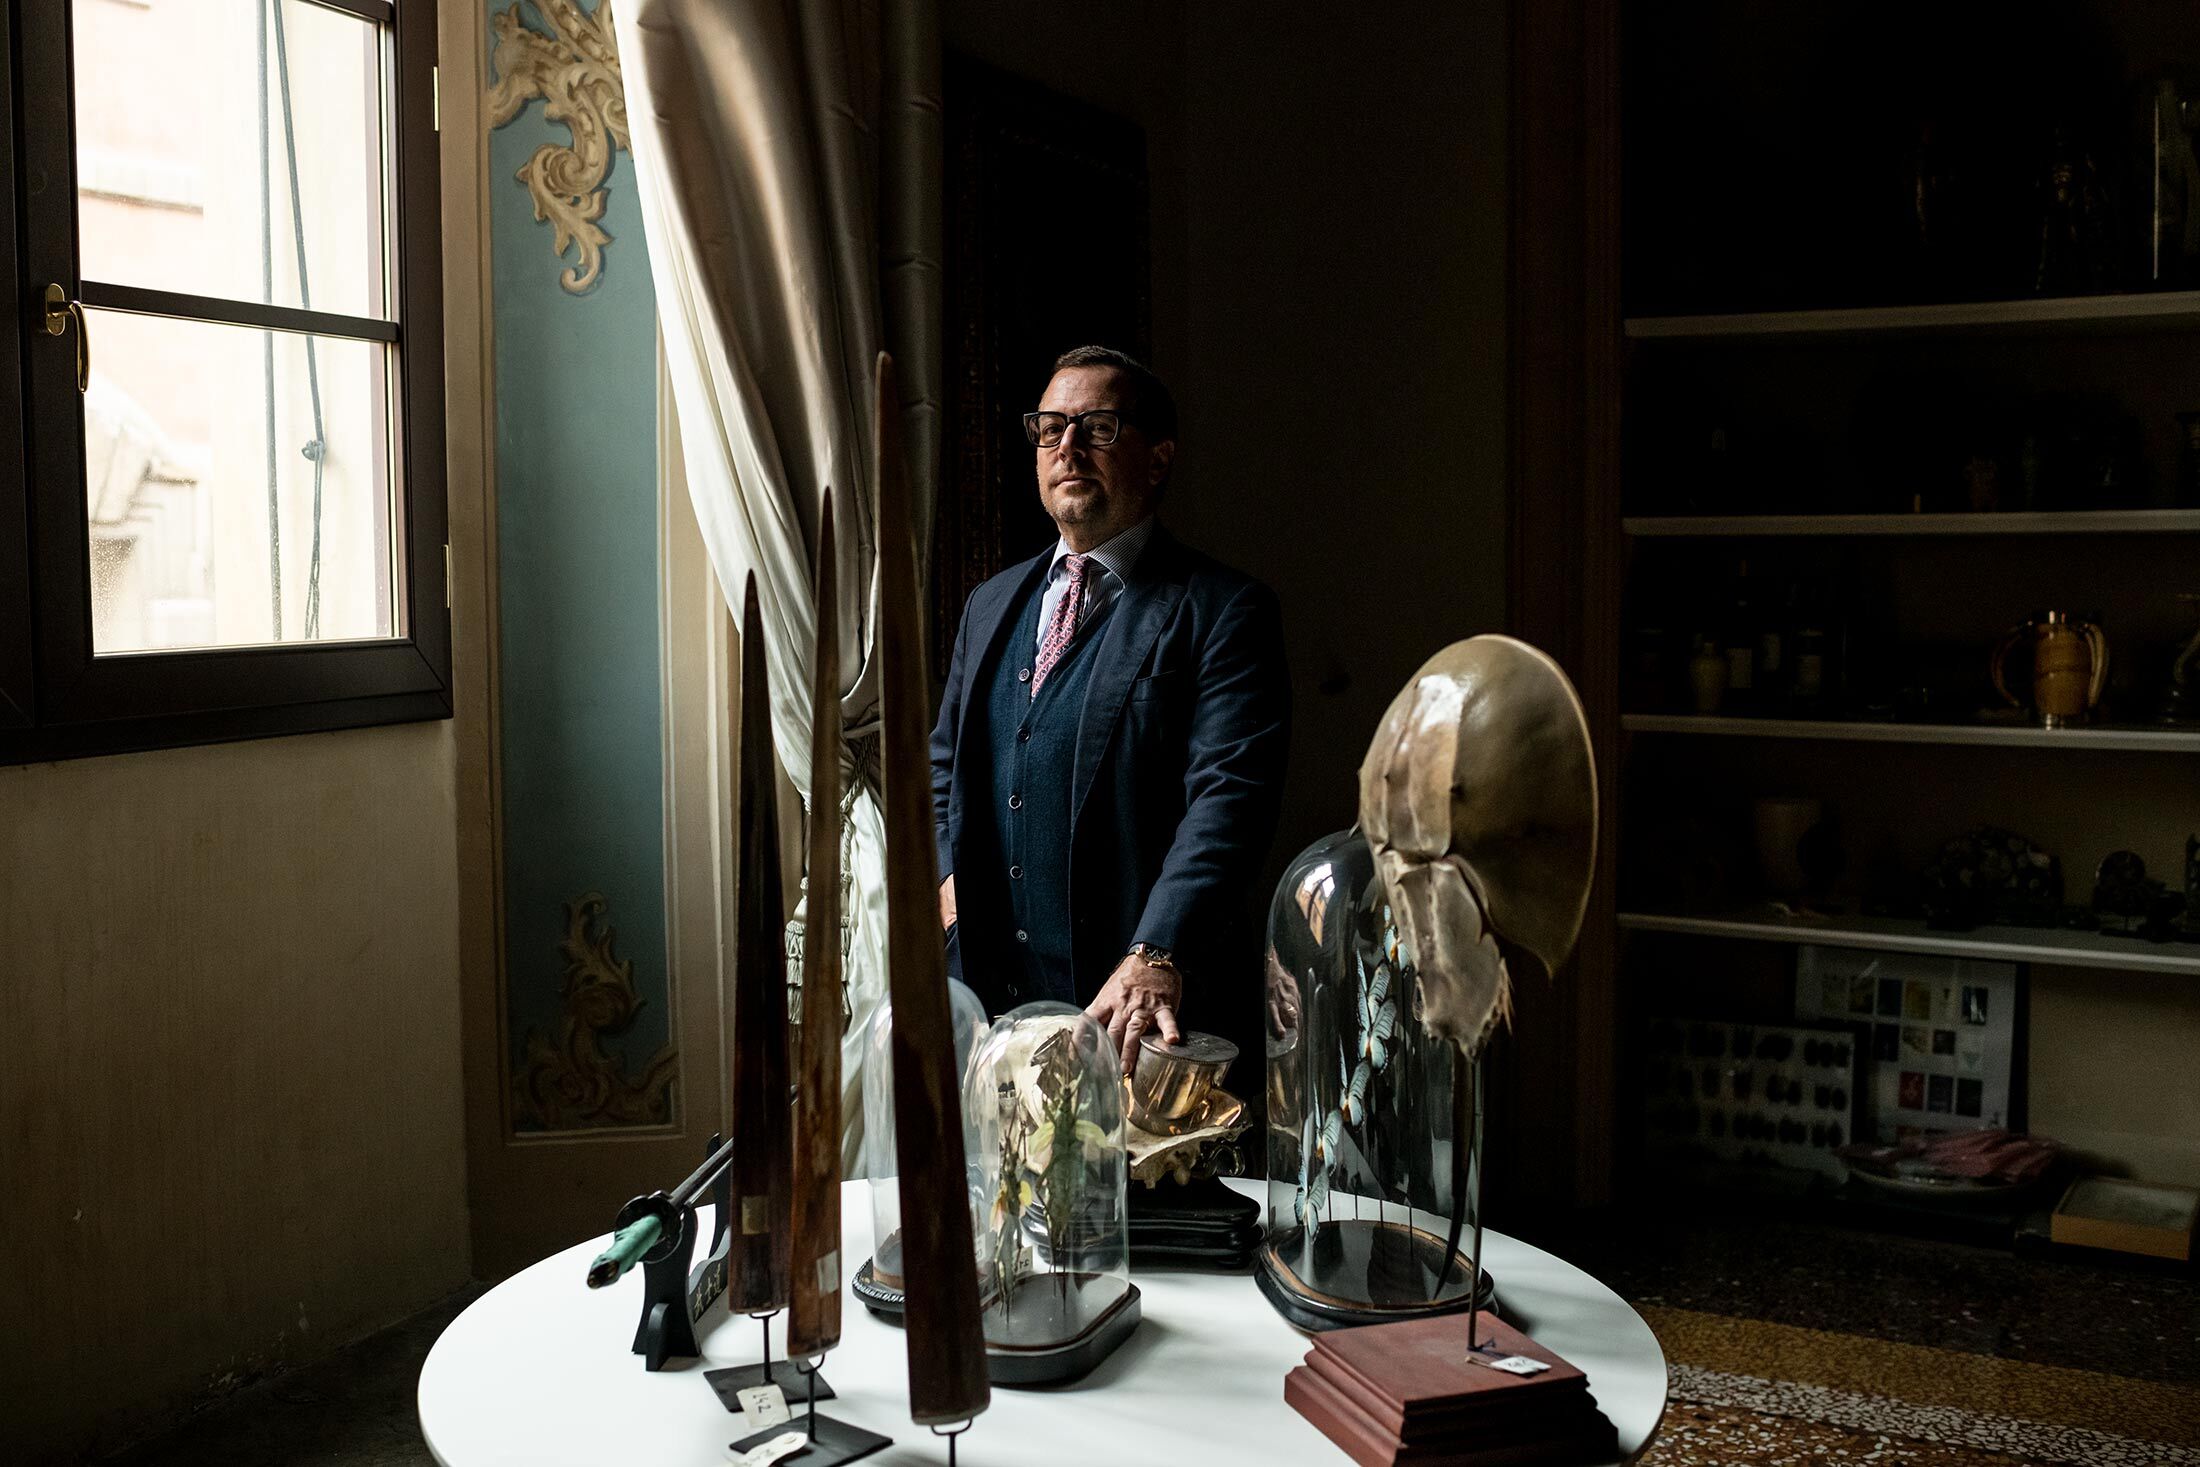 Jacopo Di Stefano at his office in Bologna, Italy.